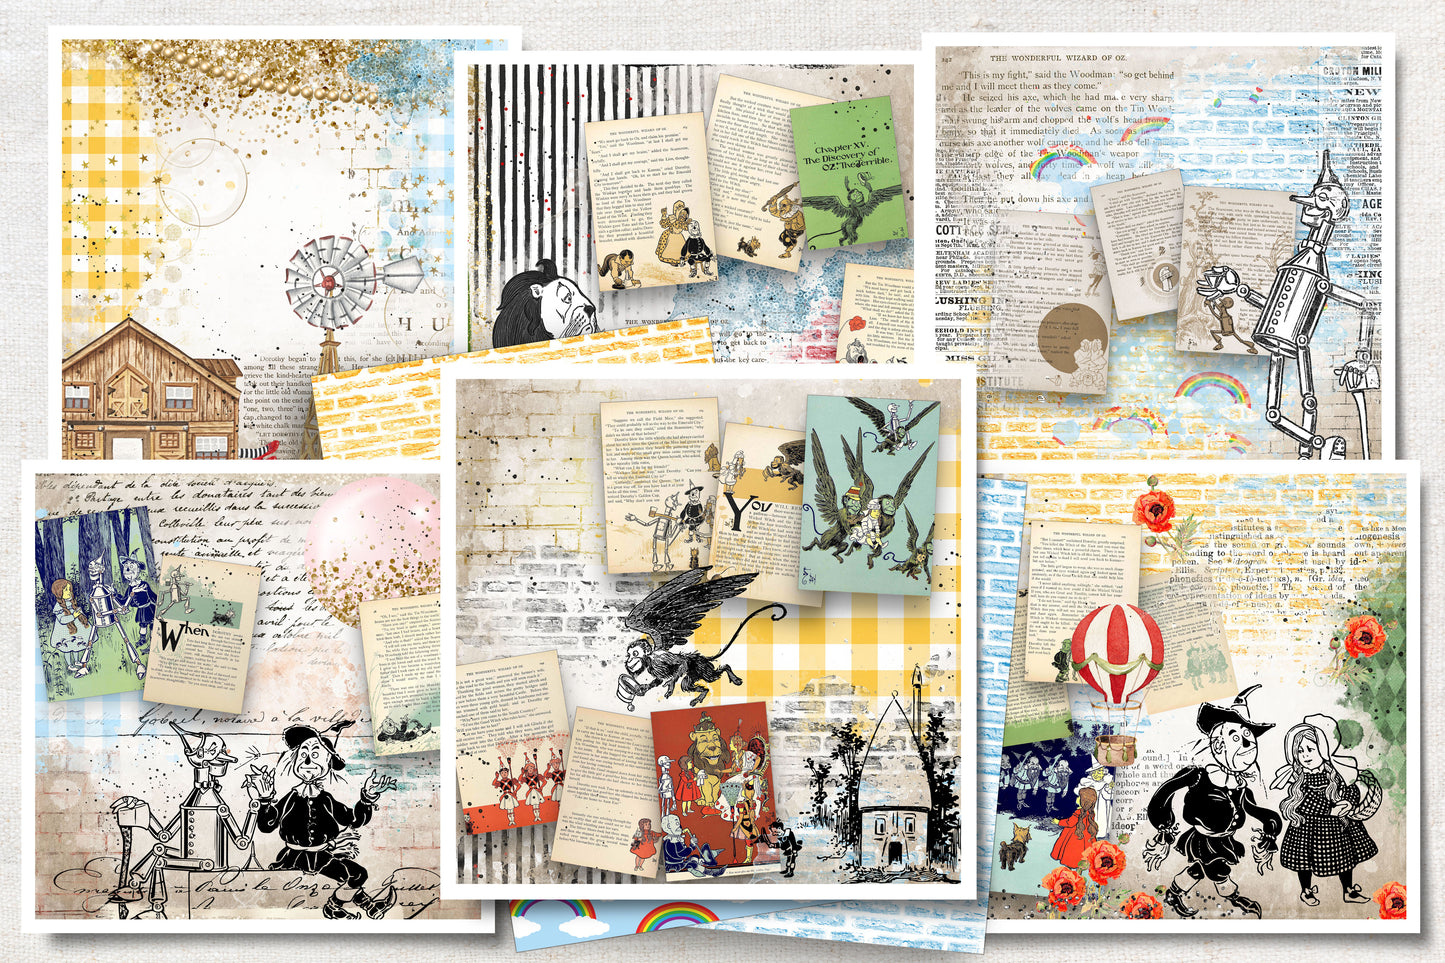 Digital Paper Collection - Storybook Collection Series - OZ